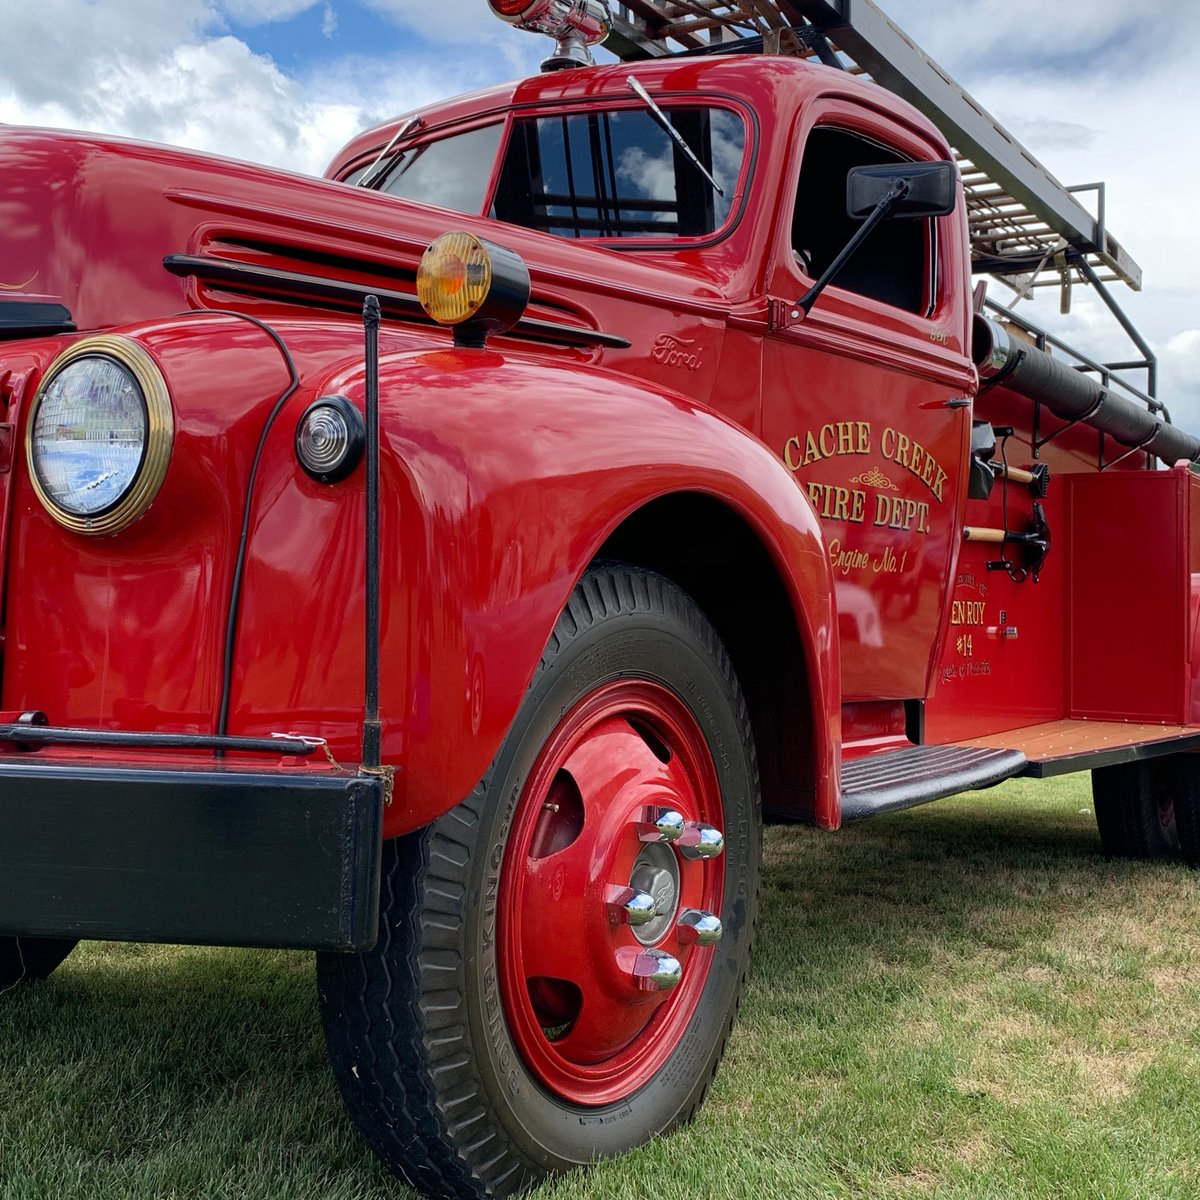 On June 12th at 11am, a classic car cruise will makes its way through Cache Creek and Ashcroft. Keeping in mind if you are going to watch to wear a mask and practice social distancing. 
#StayLocal #SupportLocal #StayHealthy #StaySafe #goldcountrybc #GConthetrail #CacheCreekBC